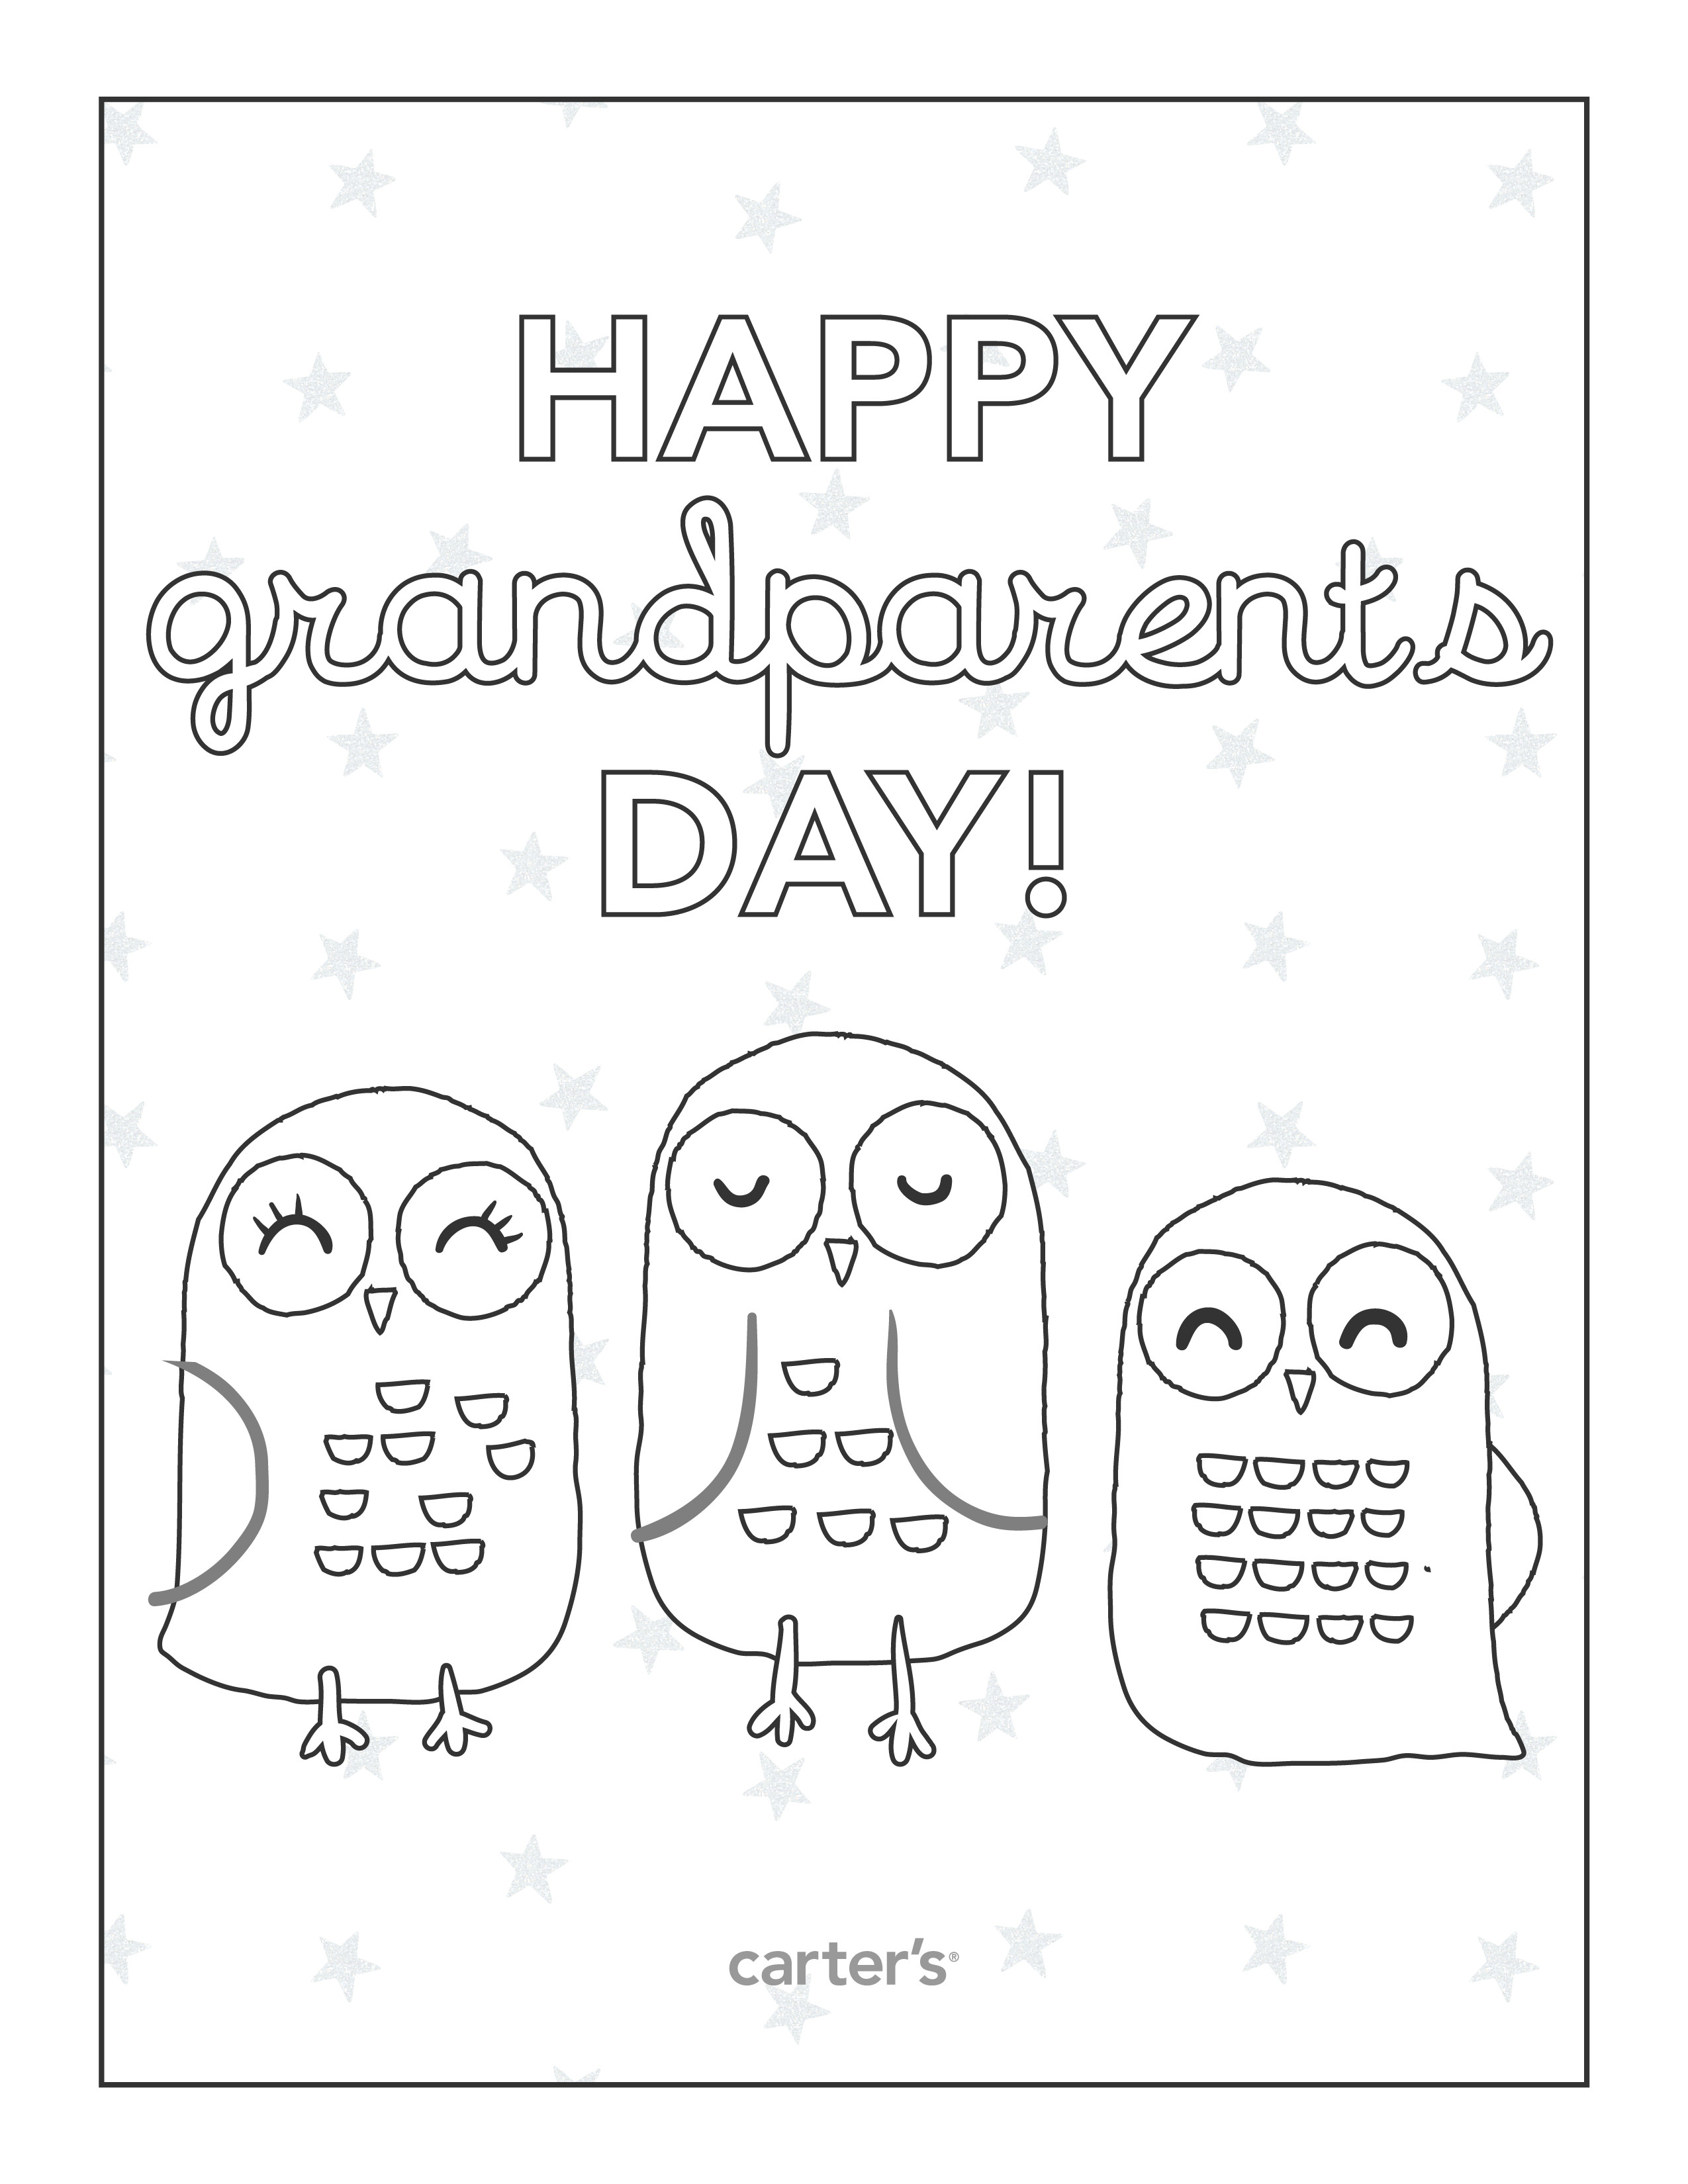 Free Coloring Pages Grandparents Day
 FREE Grandparent’s Day Coloring Pages from Carter’s